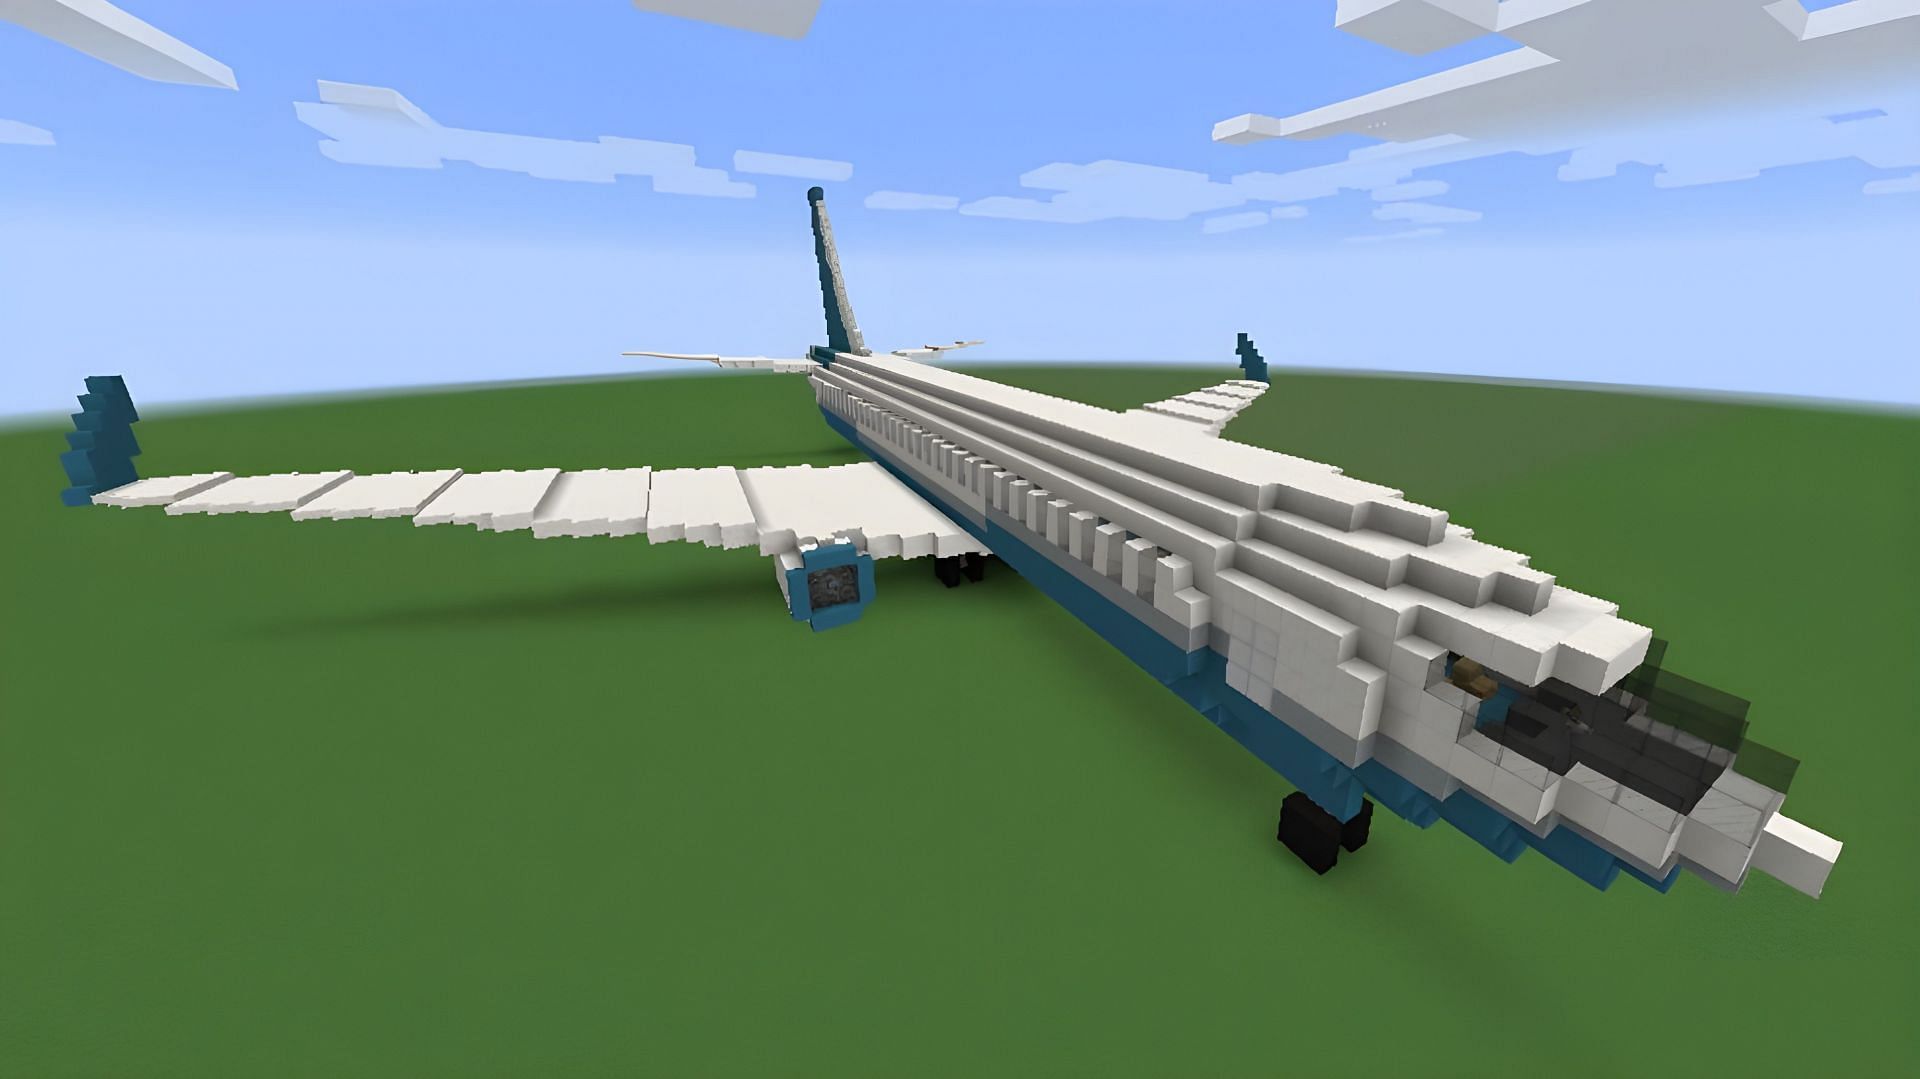 Planes make for incredible builds in Minecraft (Image via Mojang)